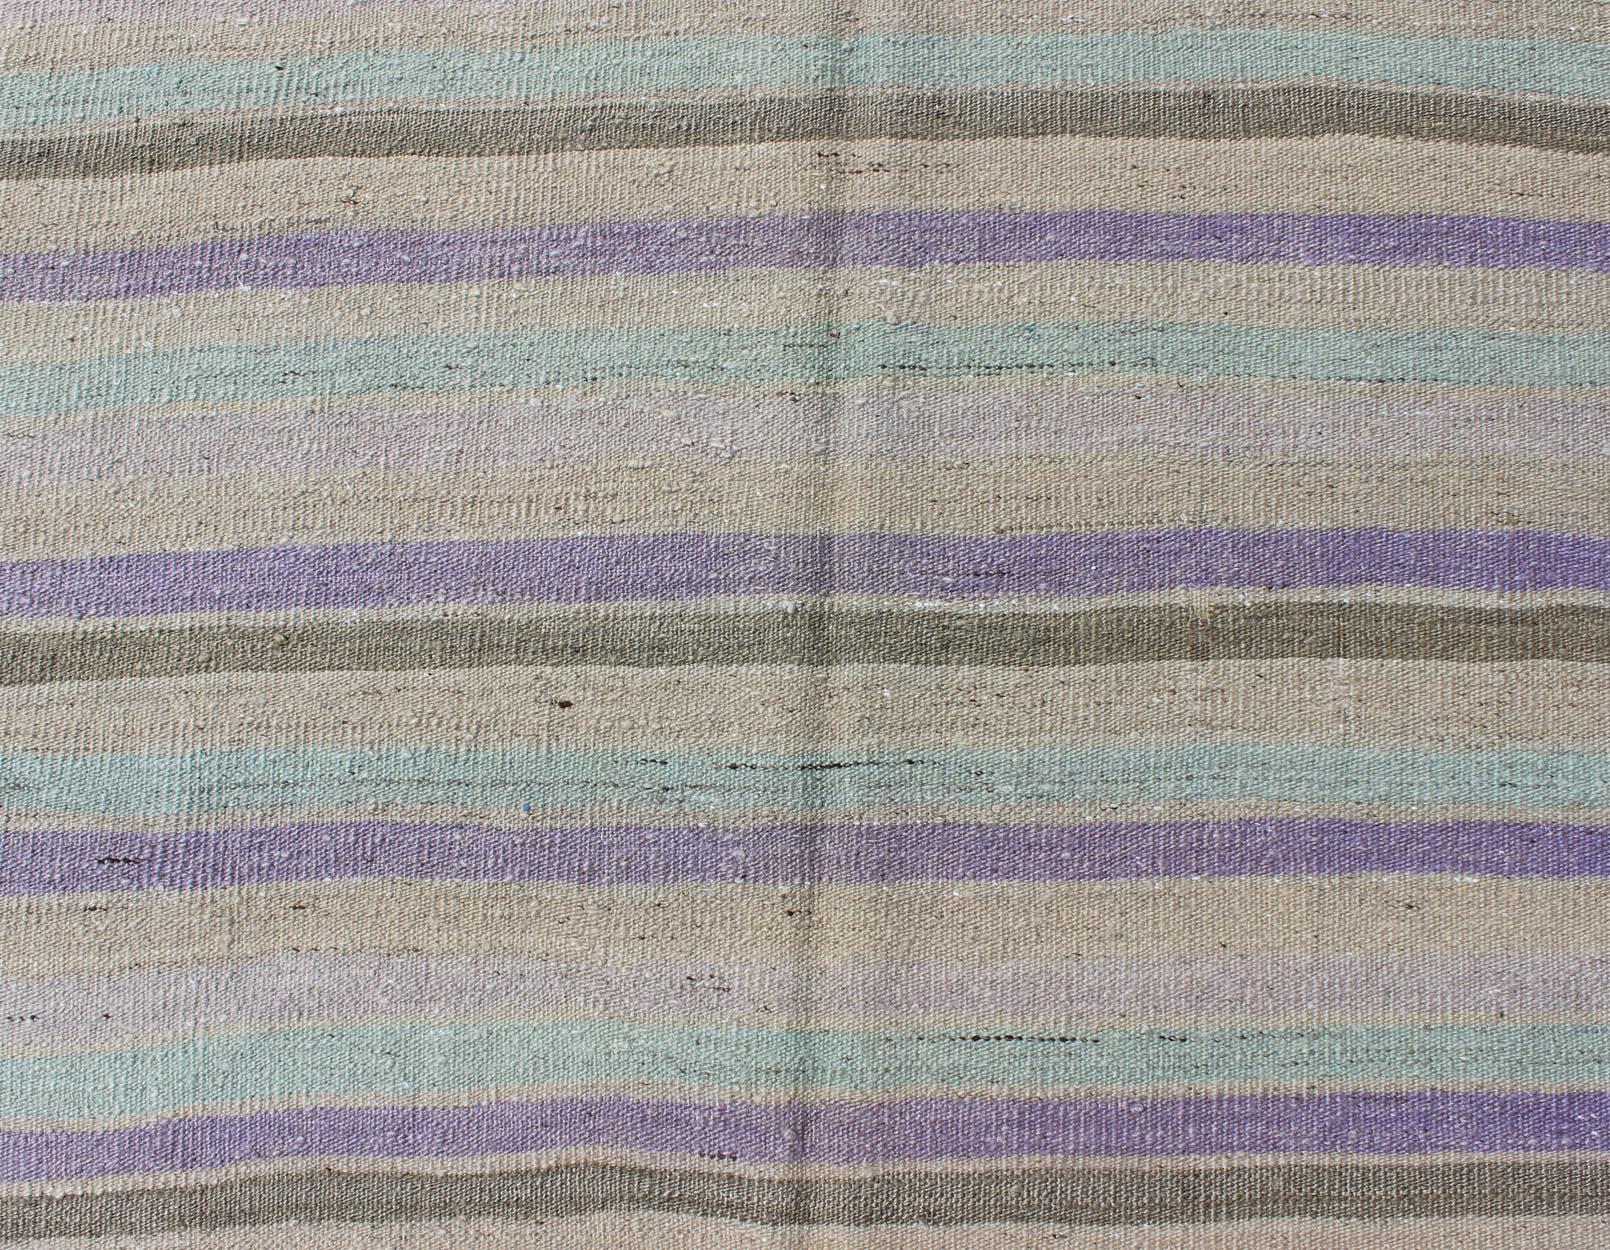 20th Century Vintage Turkish Kilim with Stripes in Light Teal, Pastel Purple, Cream and Taupe For Sale